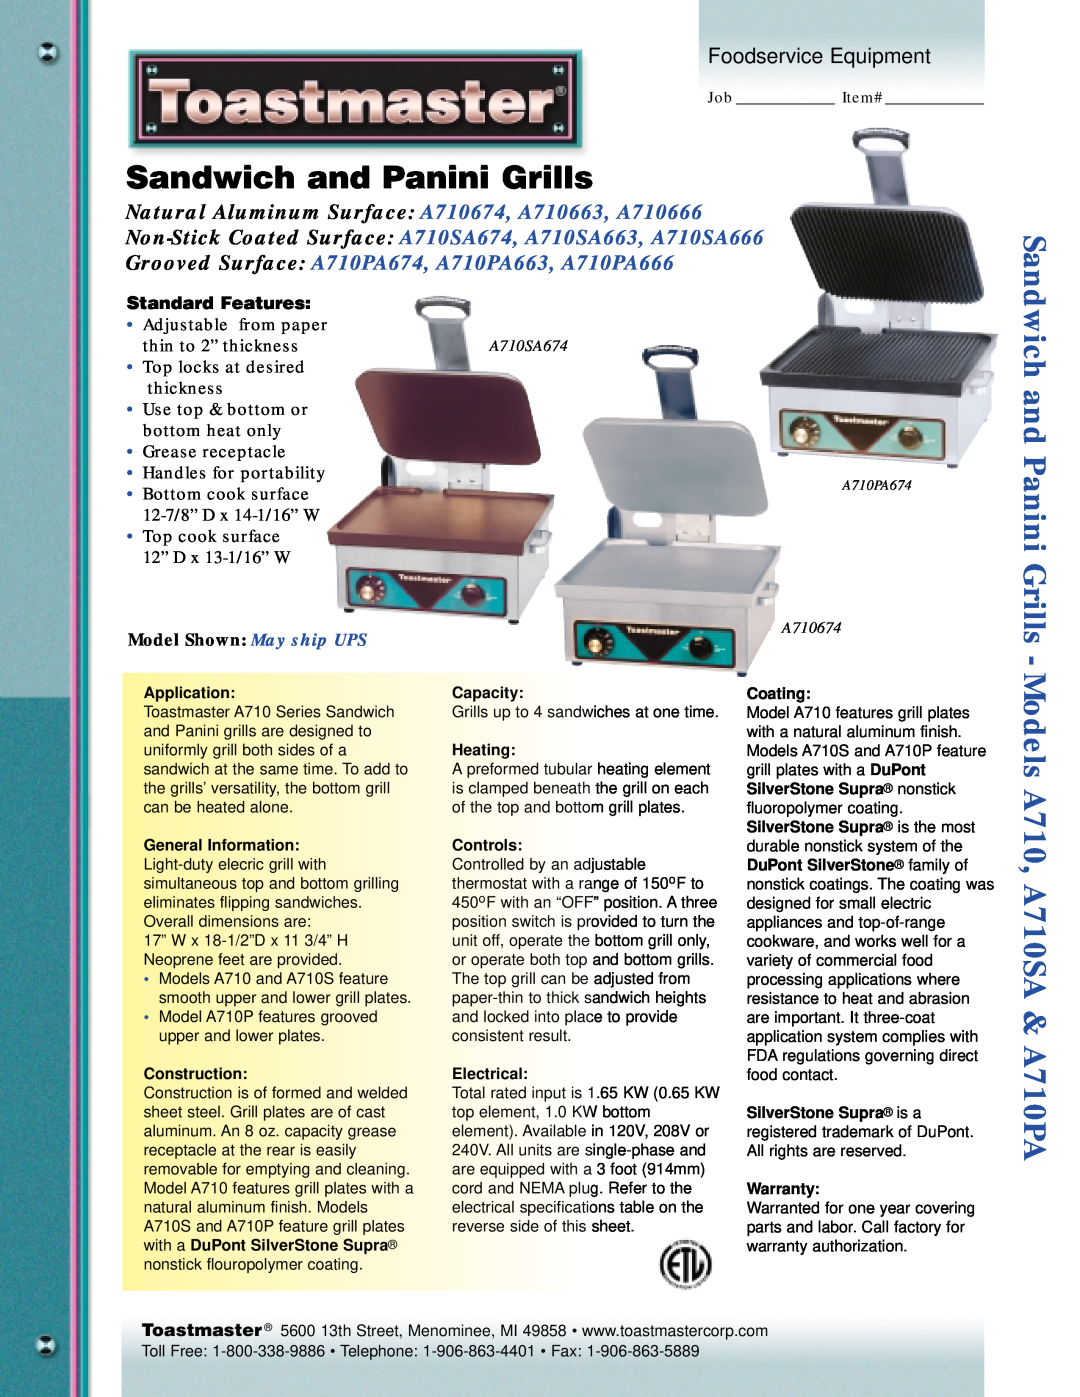 Toastmaster dimensions Sandwich and Panini Grills, Standard Features, Models A710, A710SA & A710PA, A710SA674, A710674 